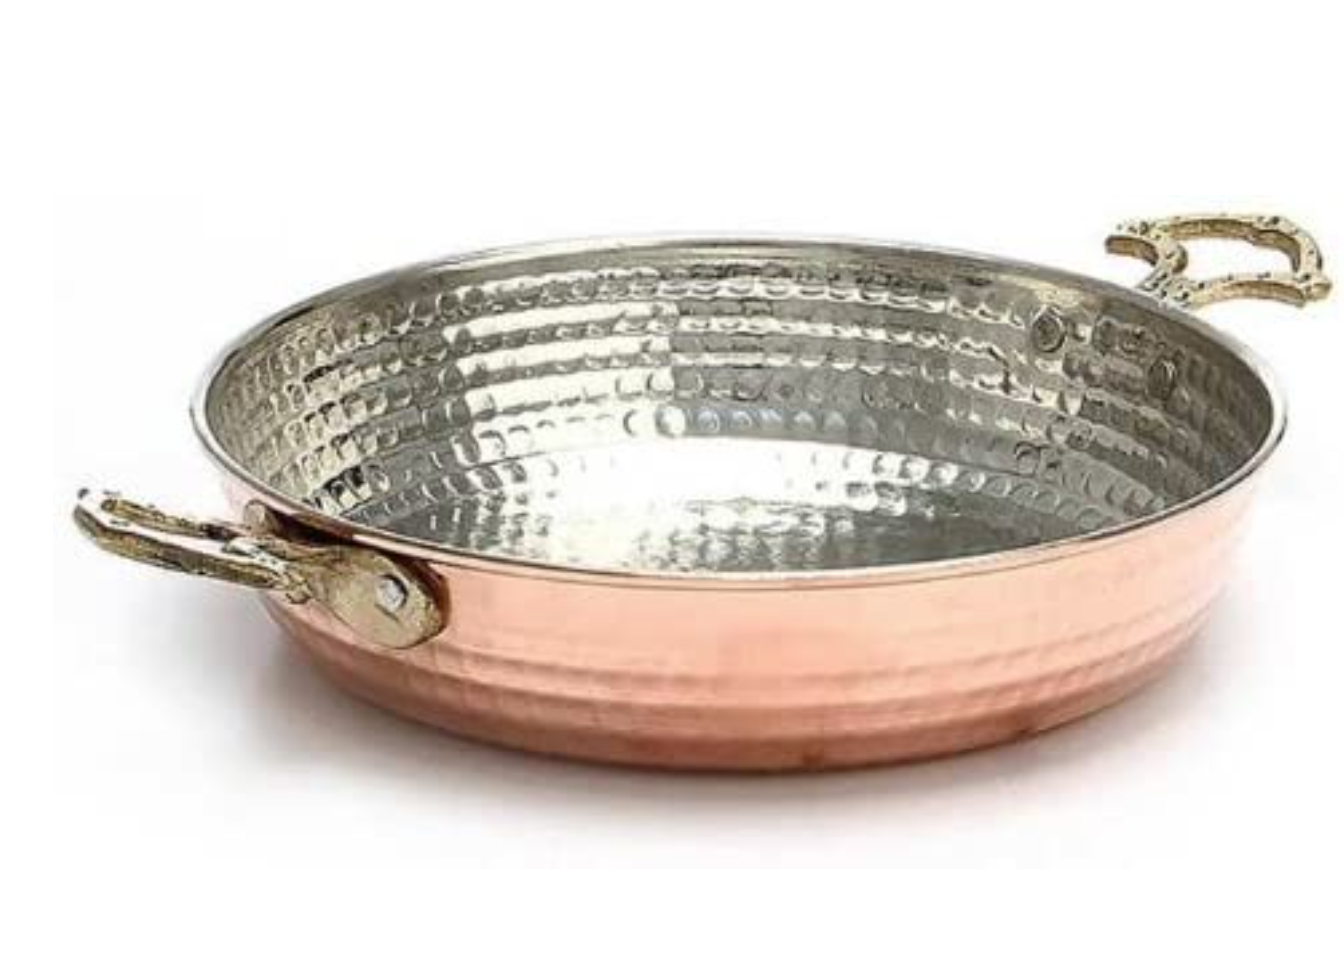 Turkish Copper Pan with Brass Handles